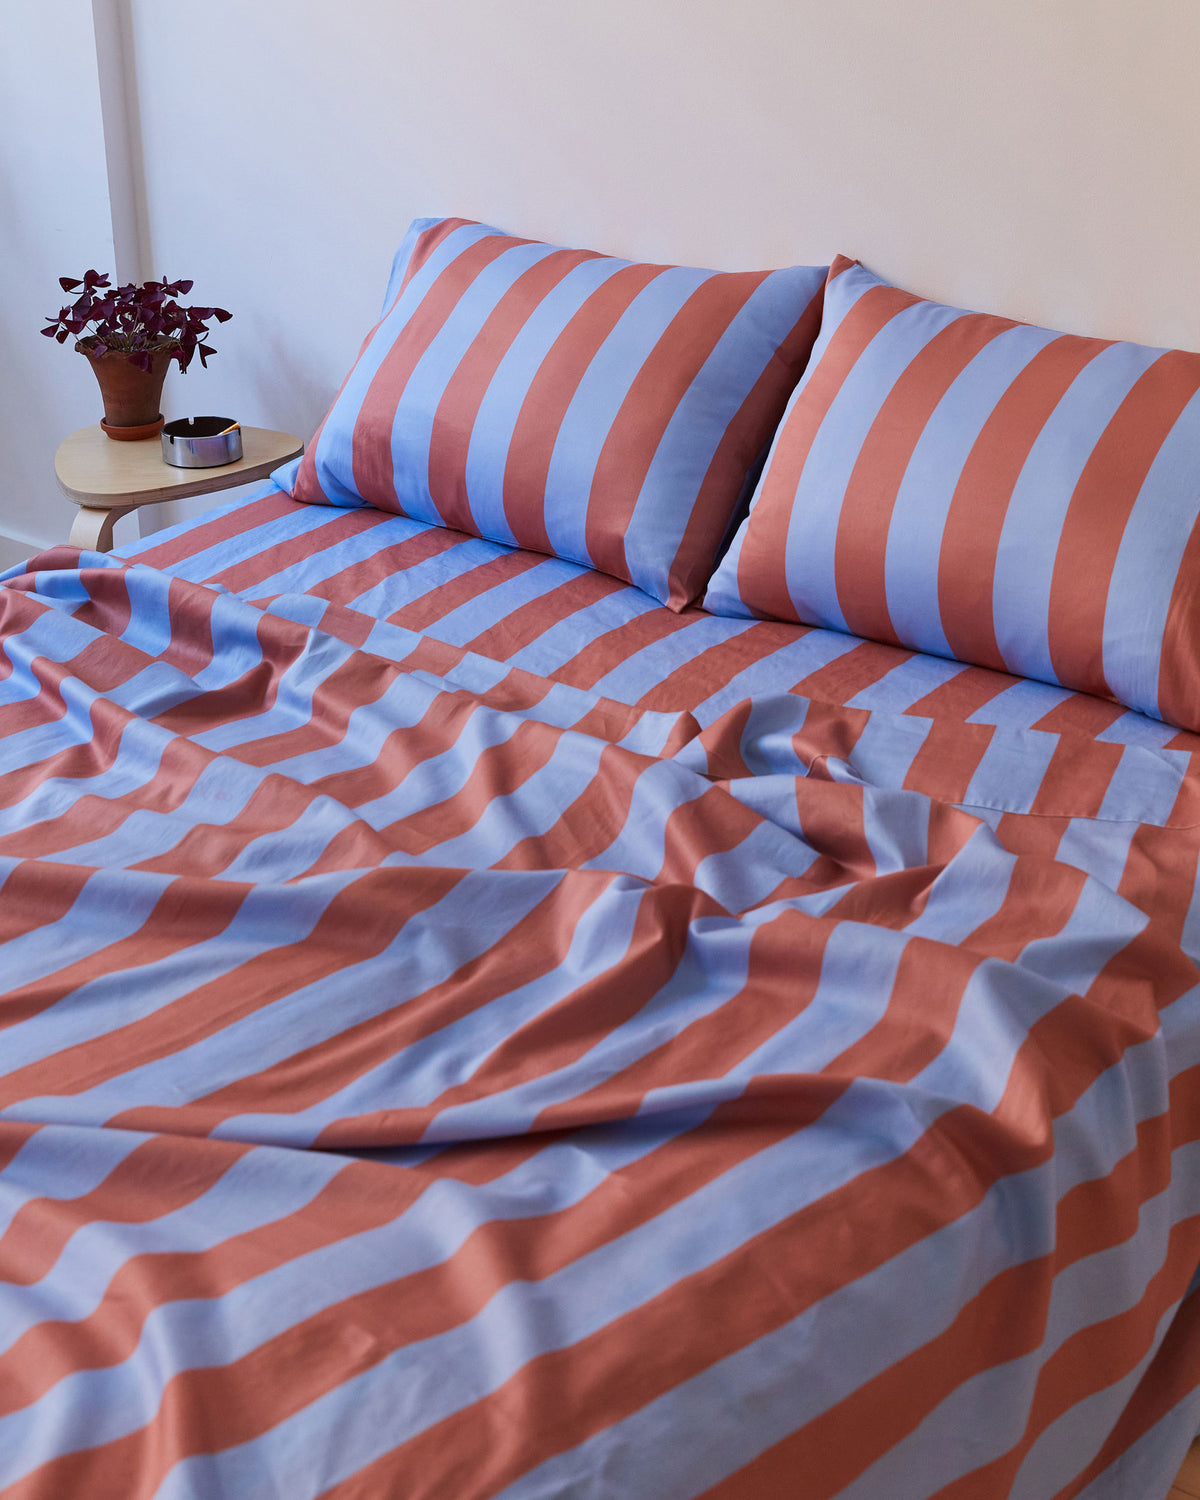 Dusen Dusen Canyon Stripe Sheets. Sheeting in soft blue and terra cotta stripes. 100% cotton sateen, 300 thread count. Machine wash cold and tumble dry. Made in Portugal. Our cotton sateen is smooth and cool to the touch and features a slightly lustrous finish.